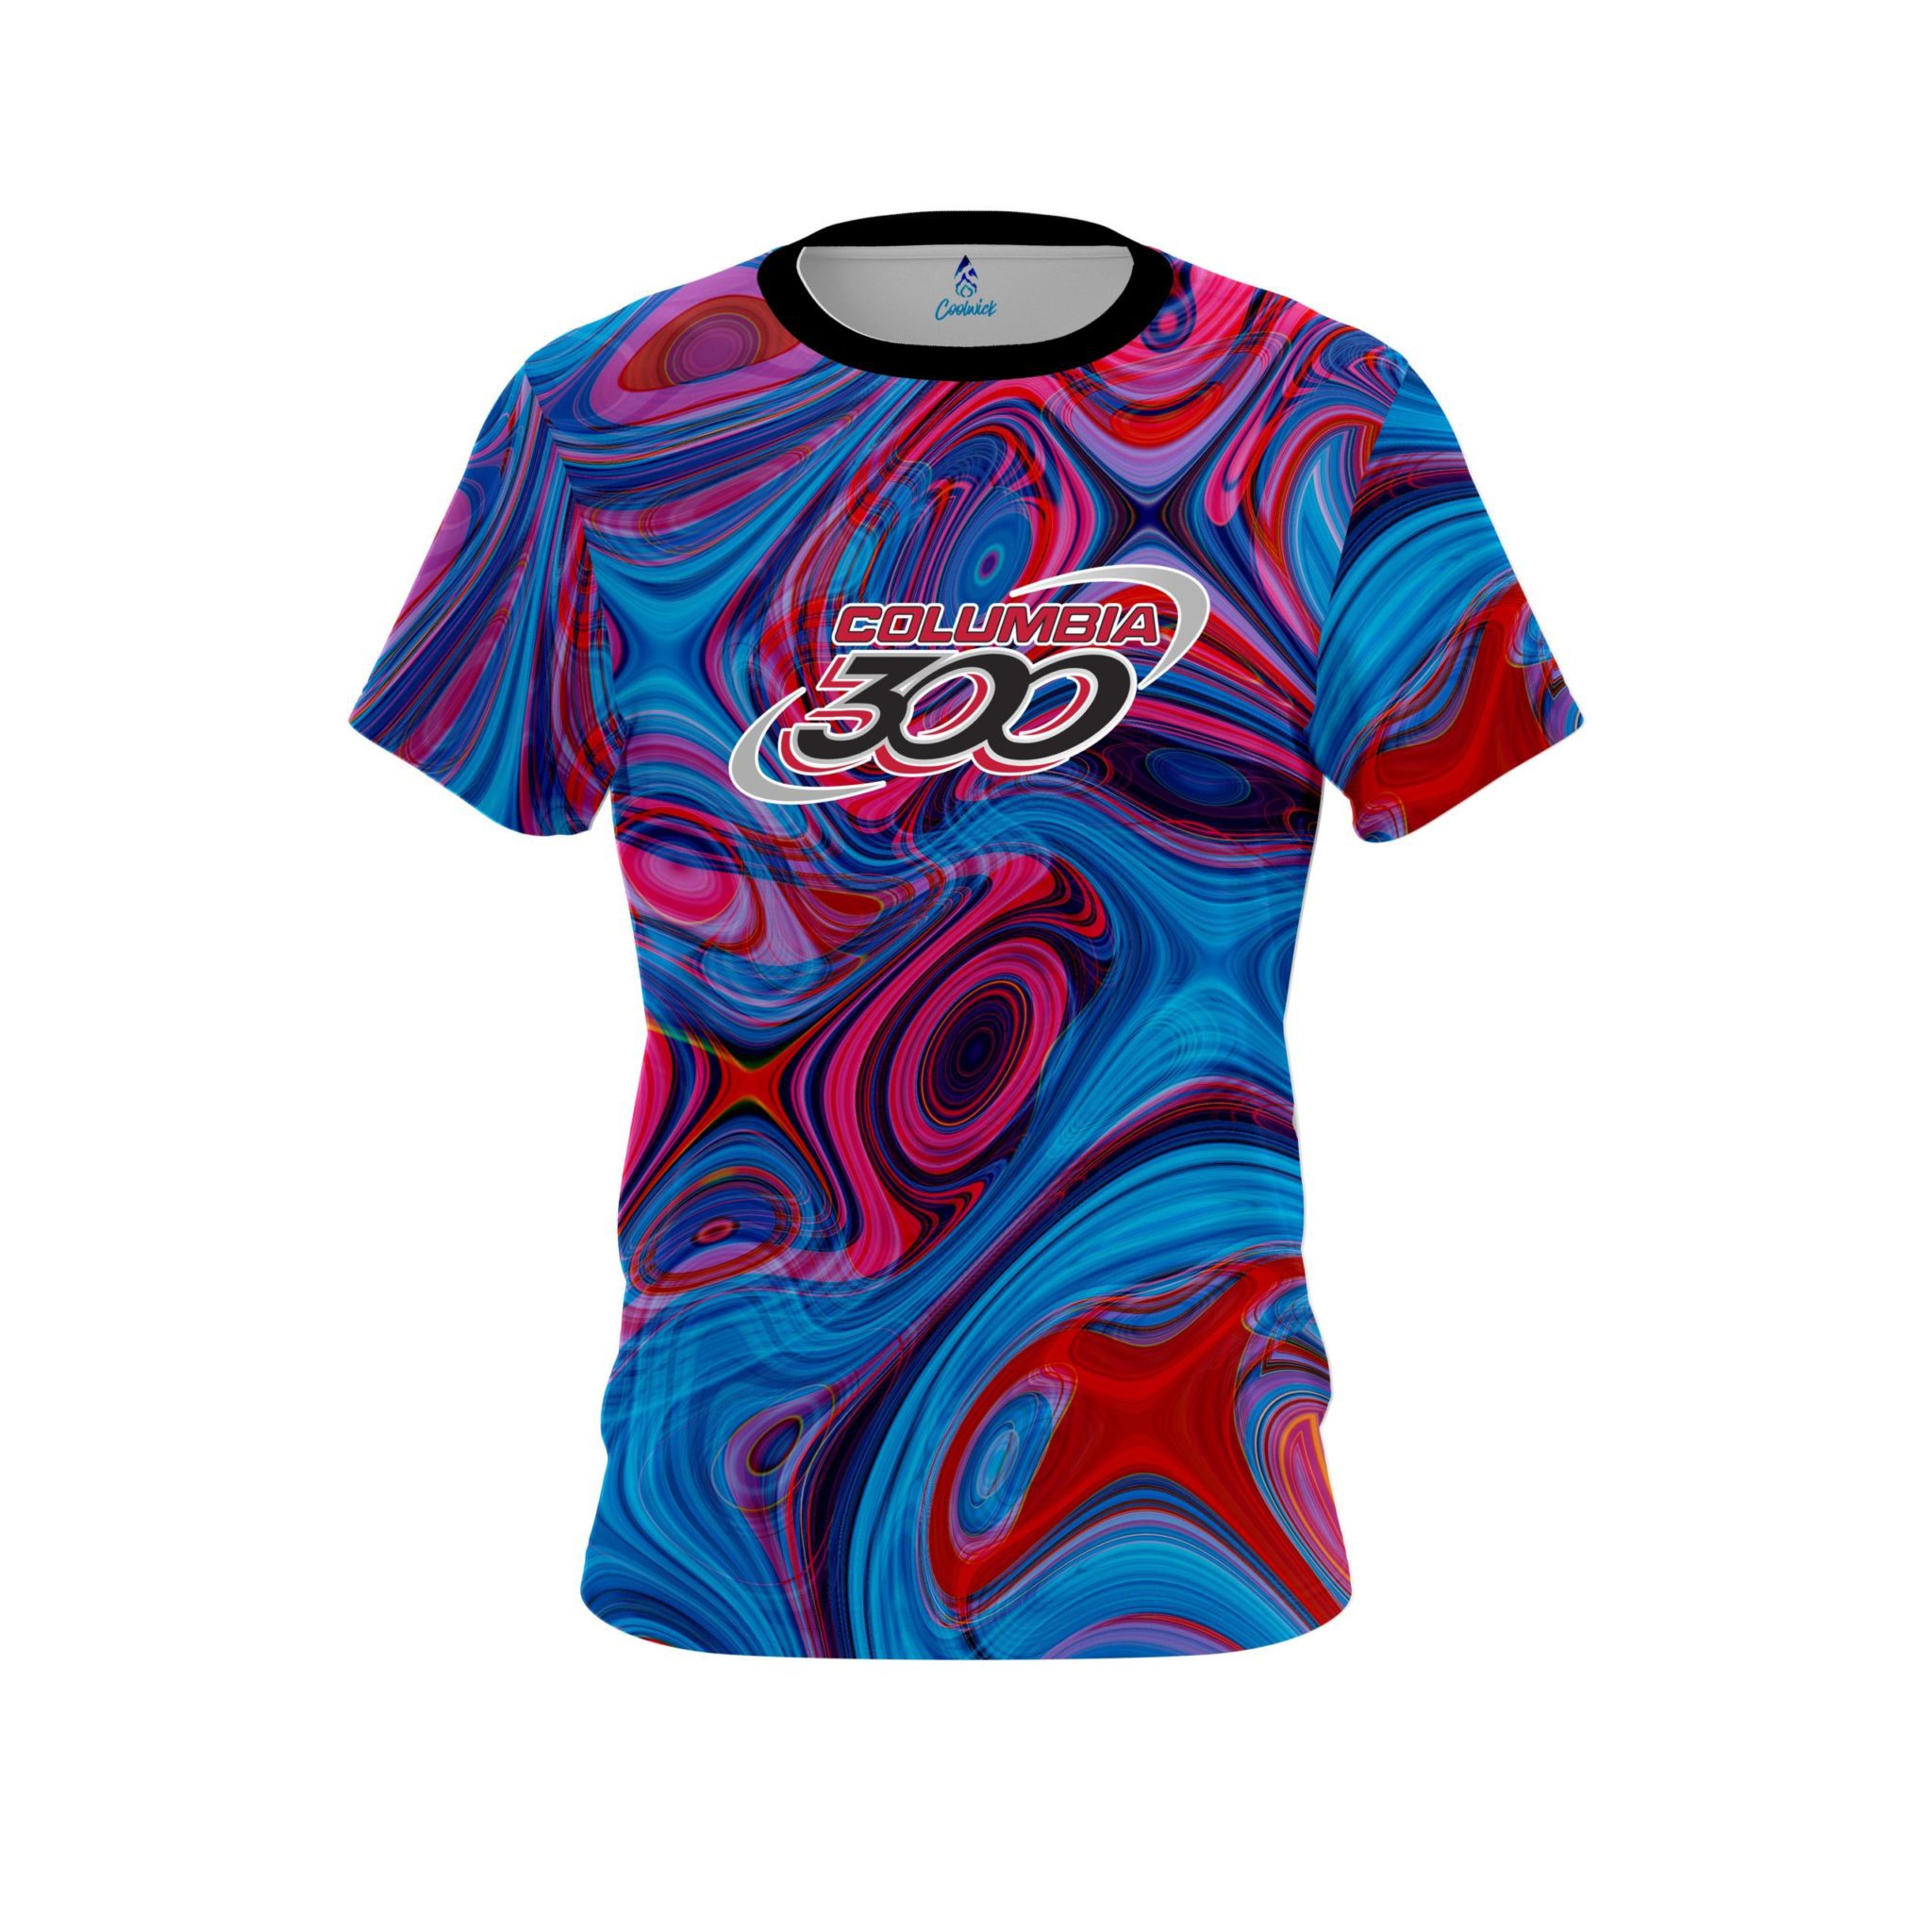 Columbia 300 Red Pink Hallucinate CoolWick Bowling Jersey